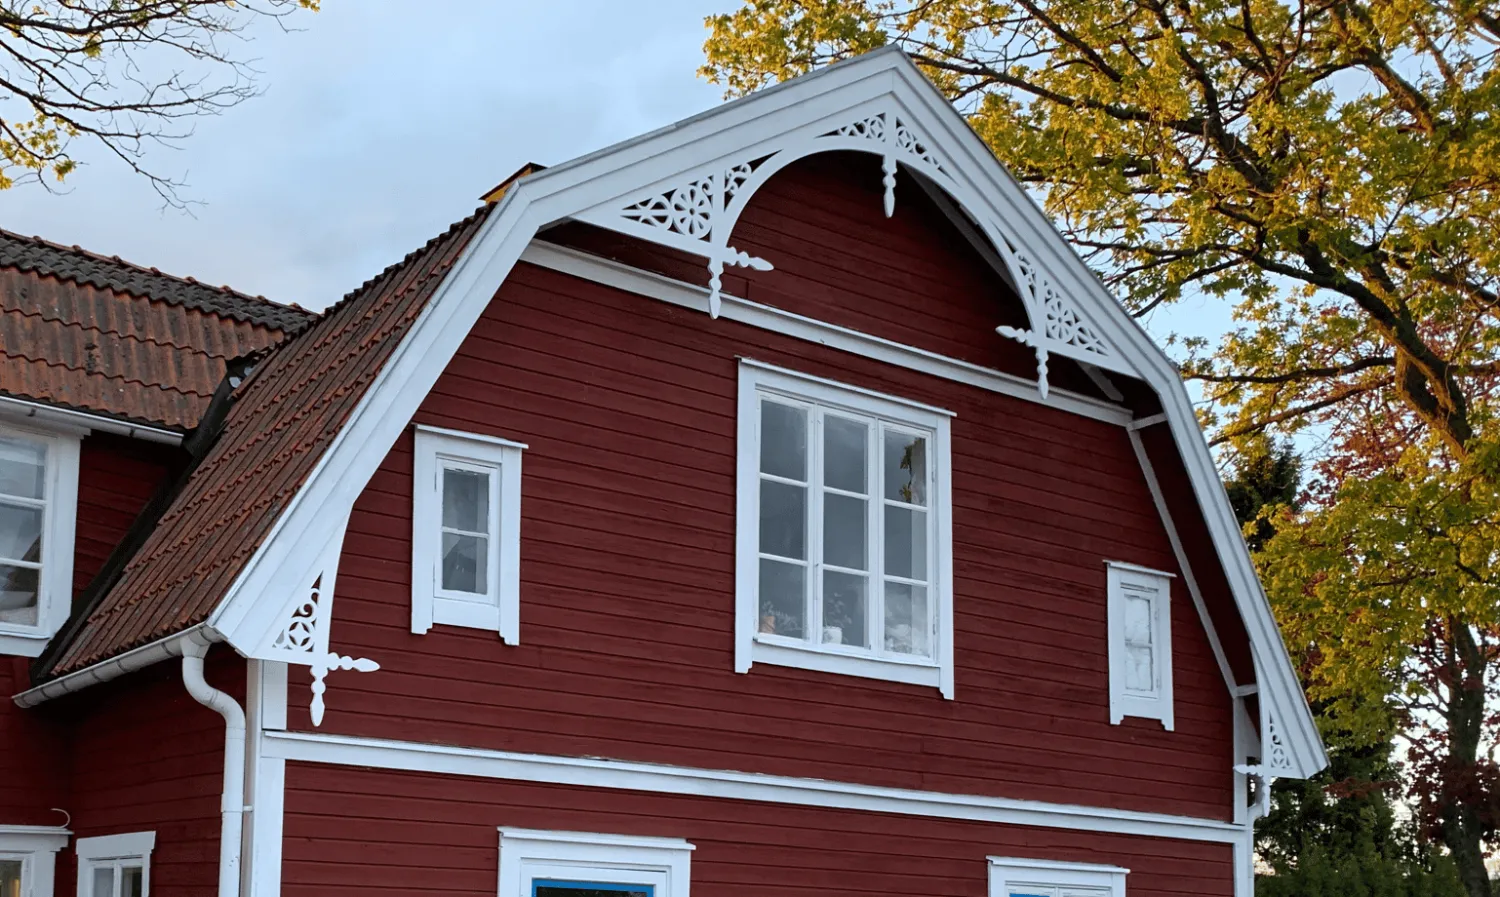 Gable pendant 001 - A house with victorian decoration for gables, eaves & bargeboards from Swedish Gaveldekor